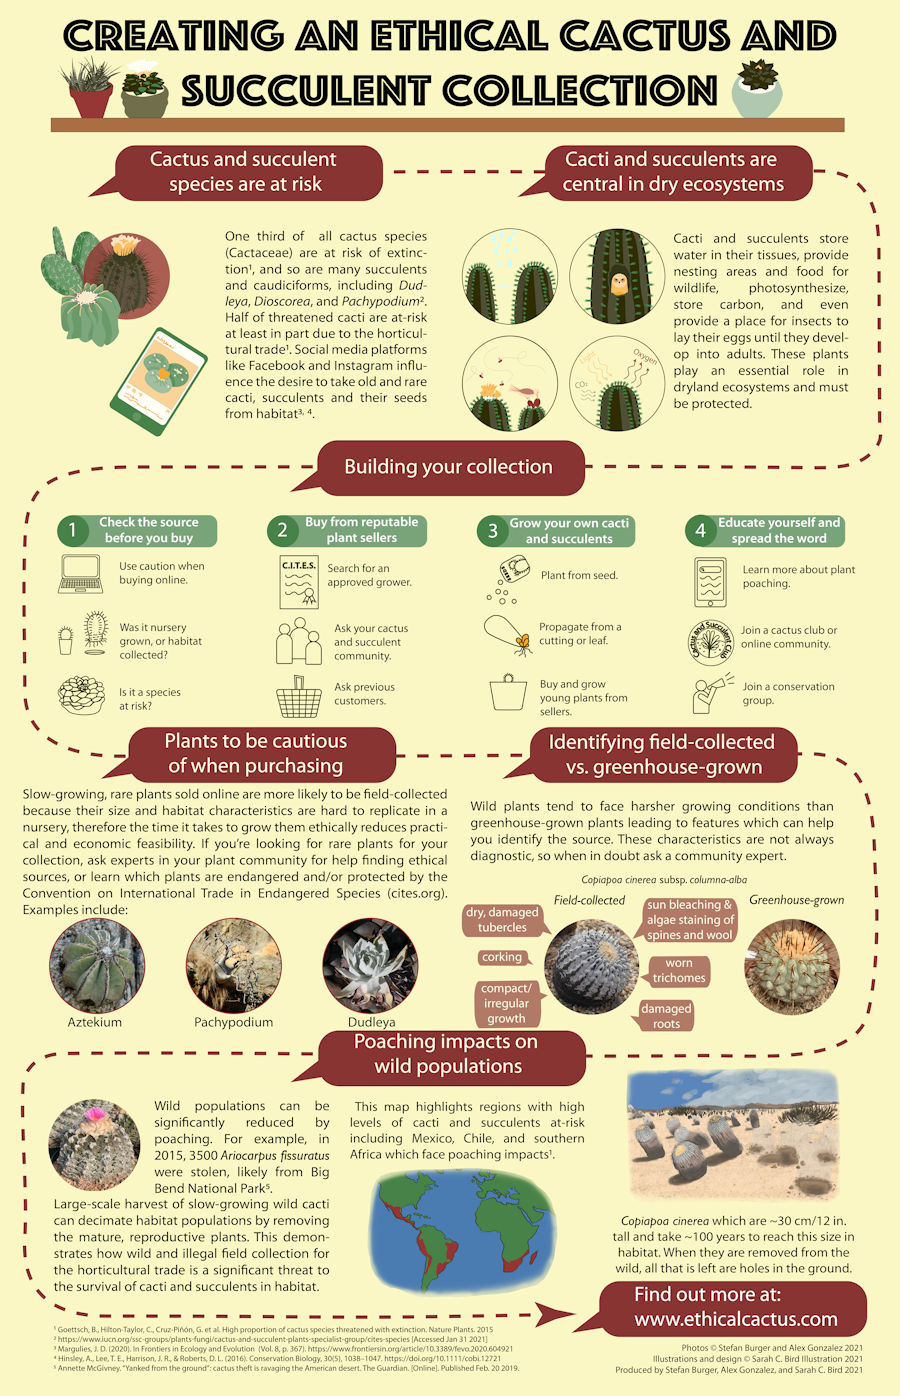 A poster that teaches people to identify and avoid purchasing poached plants that were collected from habitat